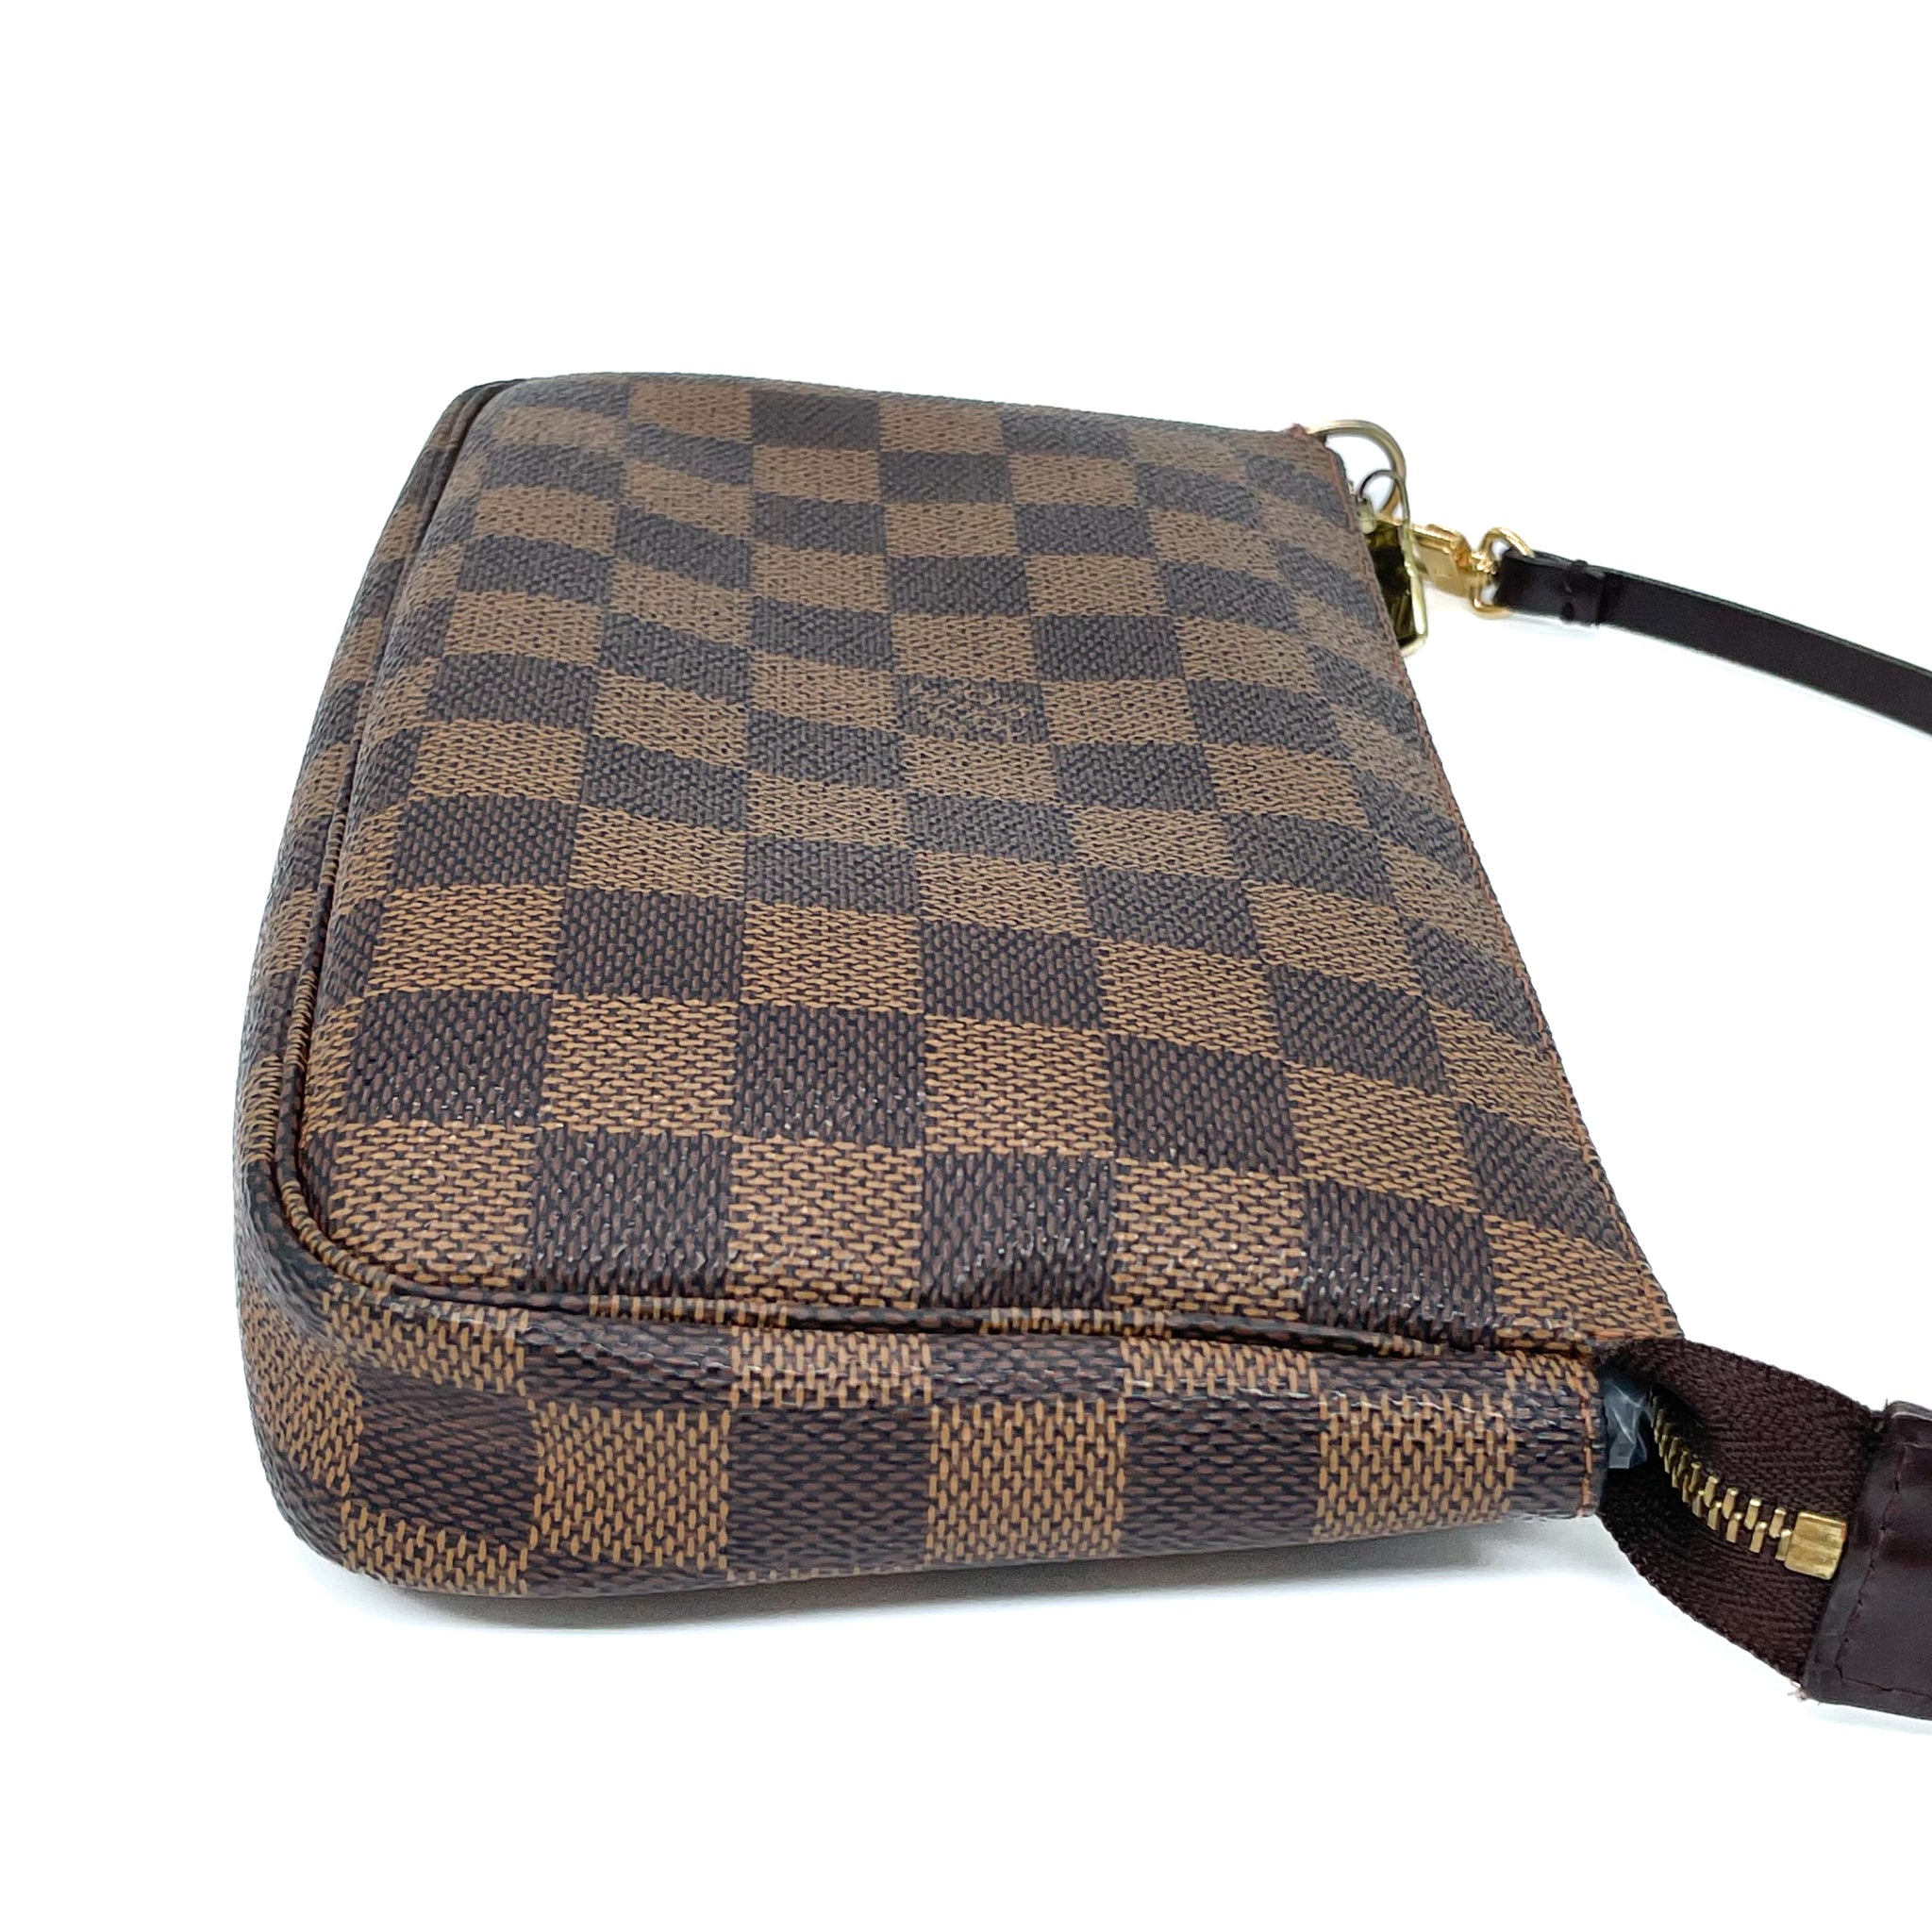 ❤️POCHETTE ACCESSORIES DAMIER AZUR ❤️ BRAND NEW MADE IN FRANCE Rm26000